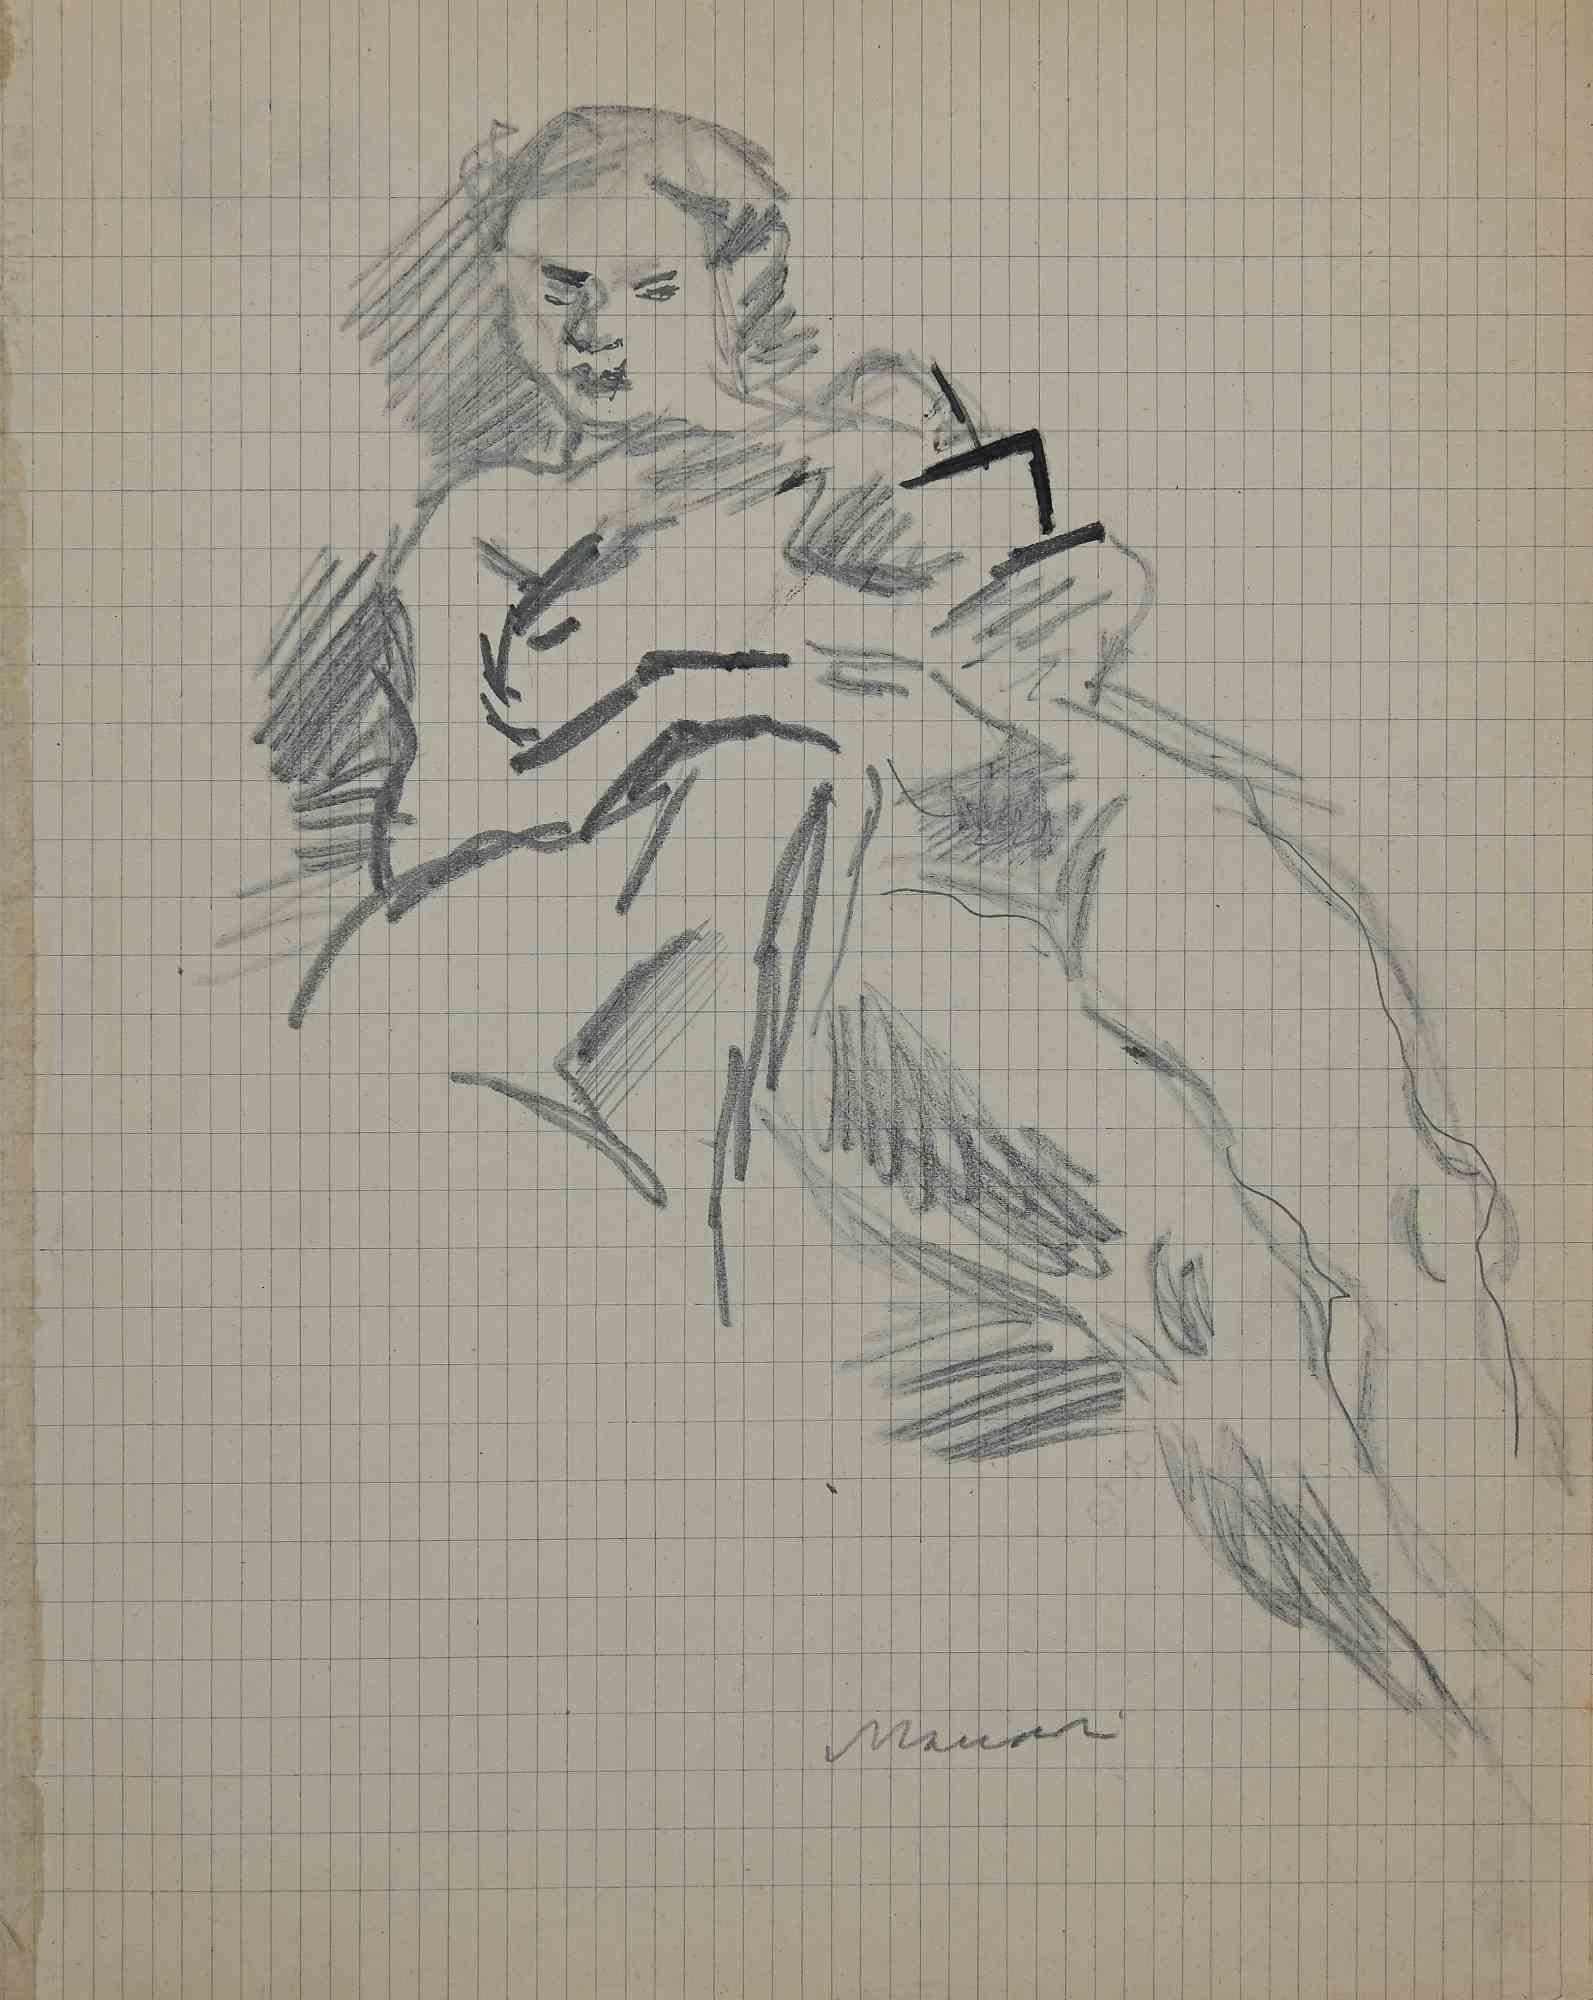 Reclined Nude is an original Pencil Drawing realized by Mino Maccari in mid-20th century.

Good condition on checkered yellowed paper.

Hand-signed by the artist with pencil.

Mino Maccari (1898-1989) was an Italian writer, painter, engraver and